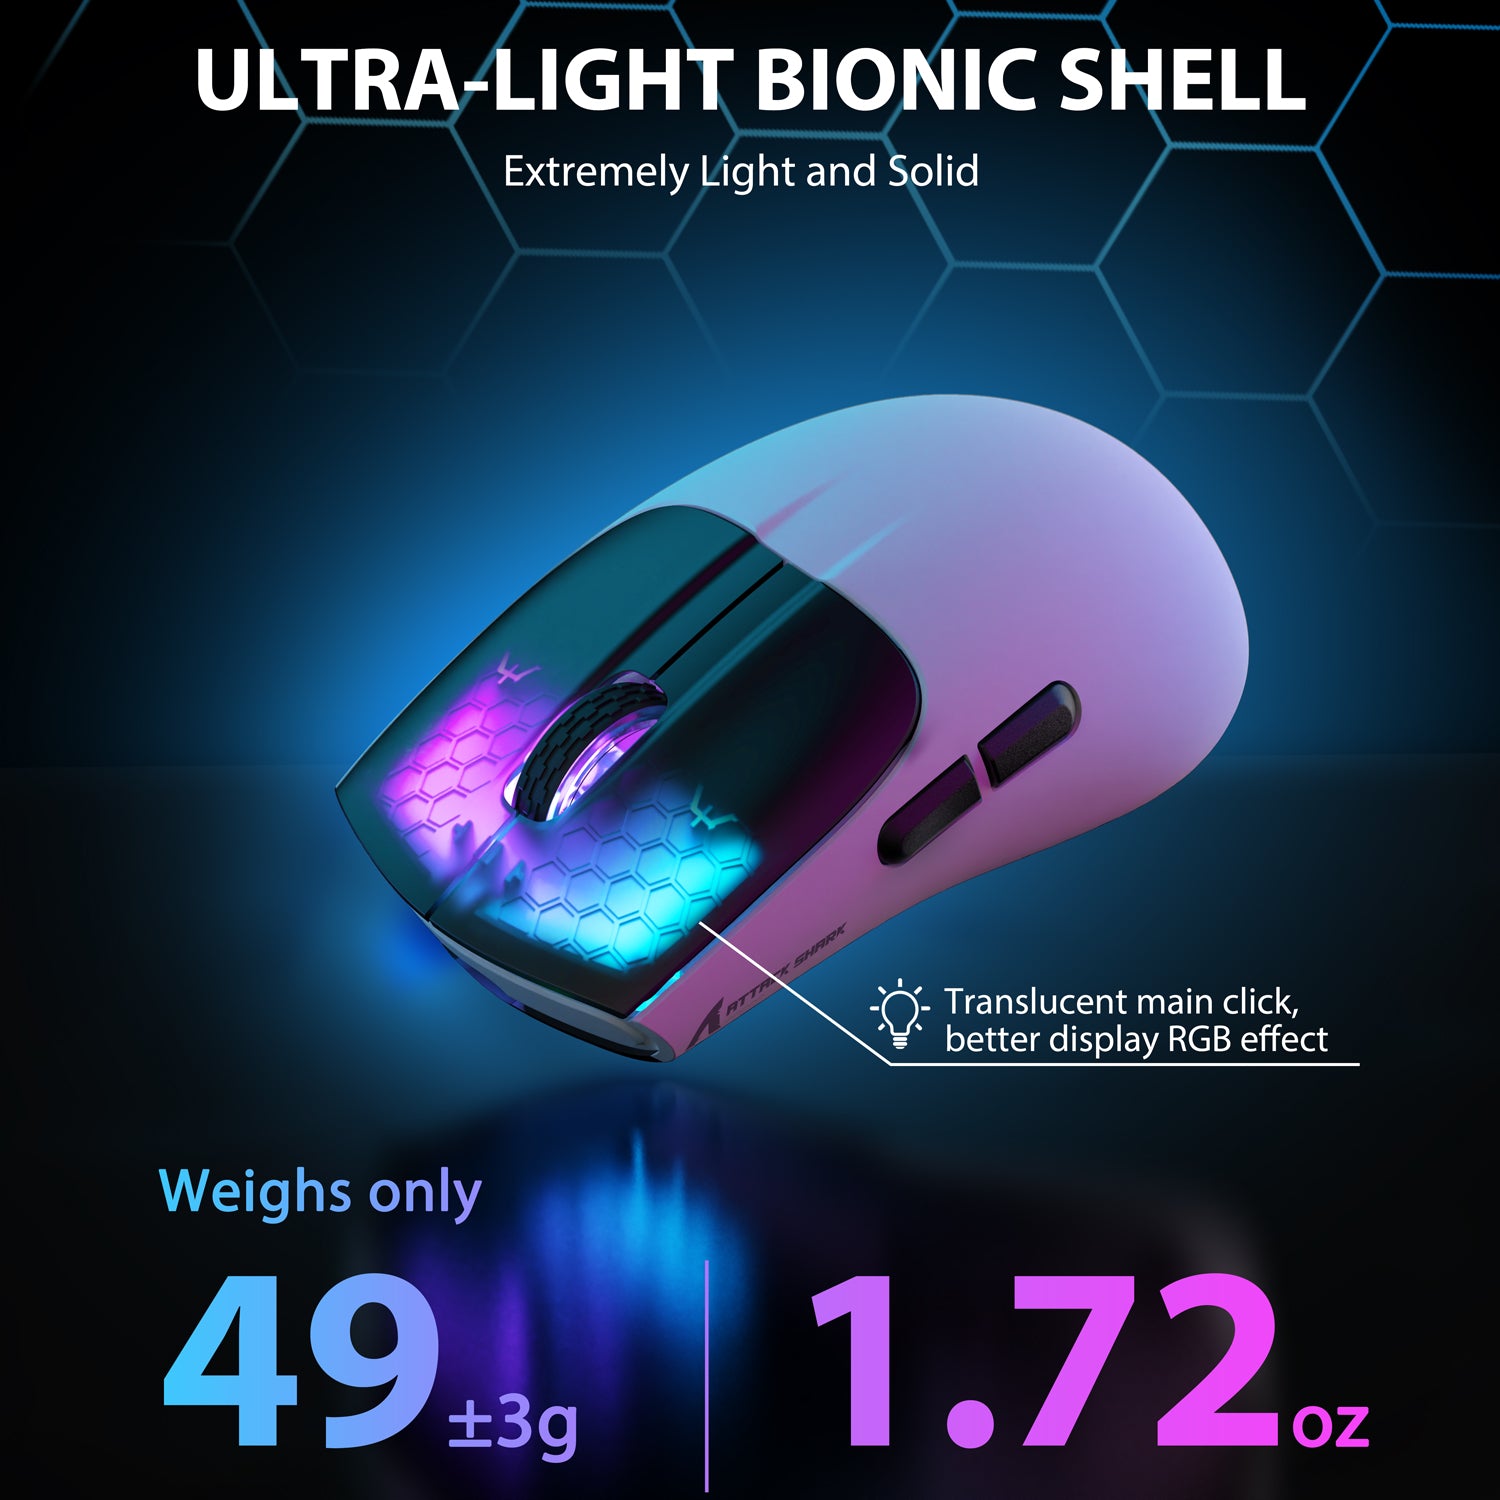 ATTACK SHARK X5 Wireless Gaming Mouse, 49g Ultralight Tri-mode 2.4Ghz/USB-C Wired/Bluetooth, 4000DPI RGB Backlit Mouse for Win/MAC